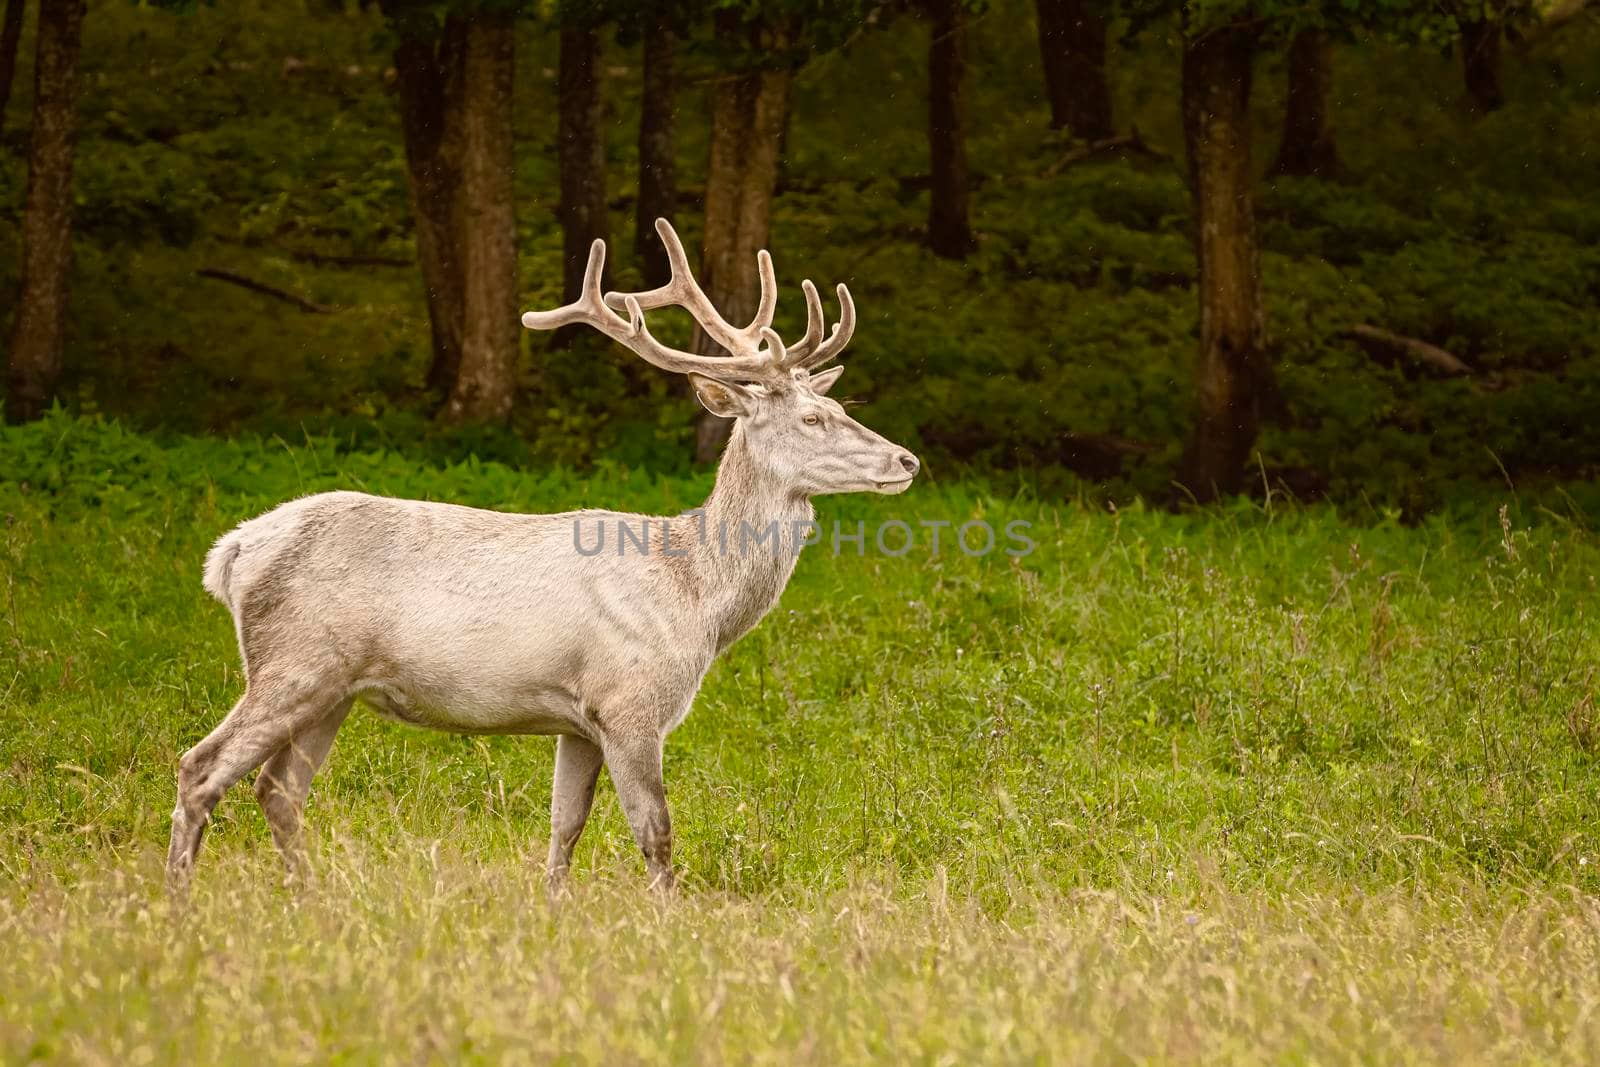 White deer at the lawn by SNR